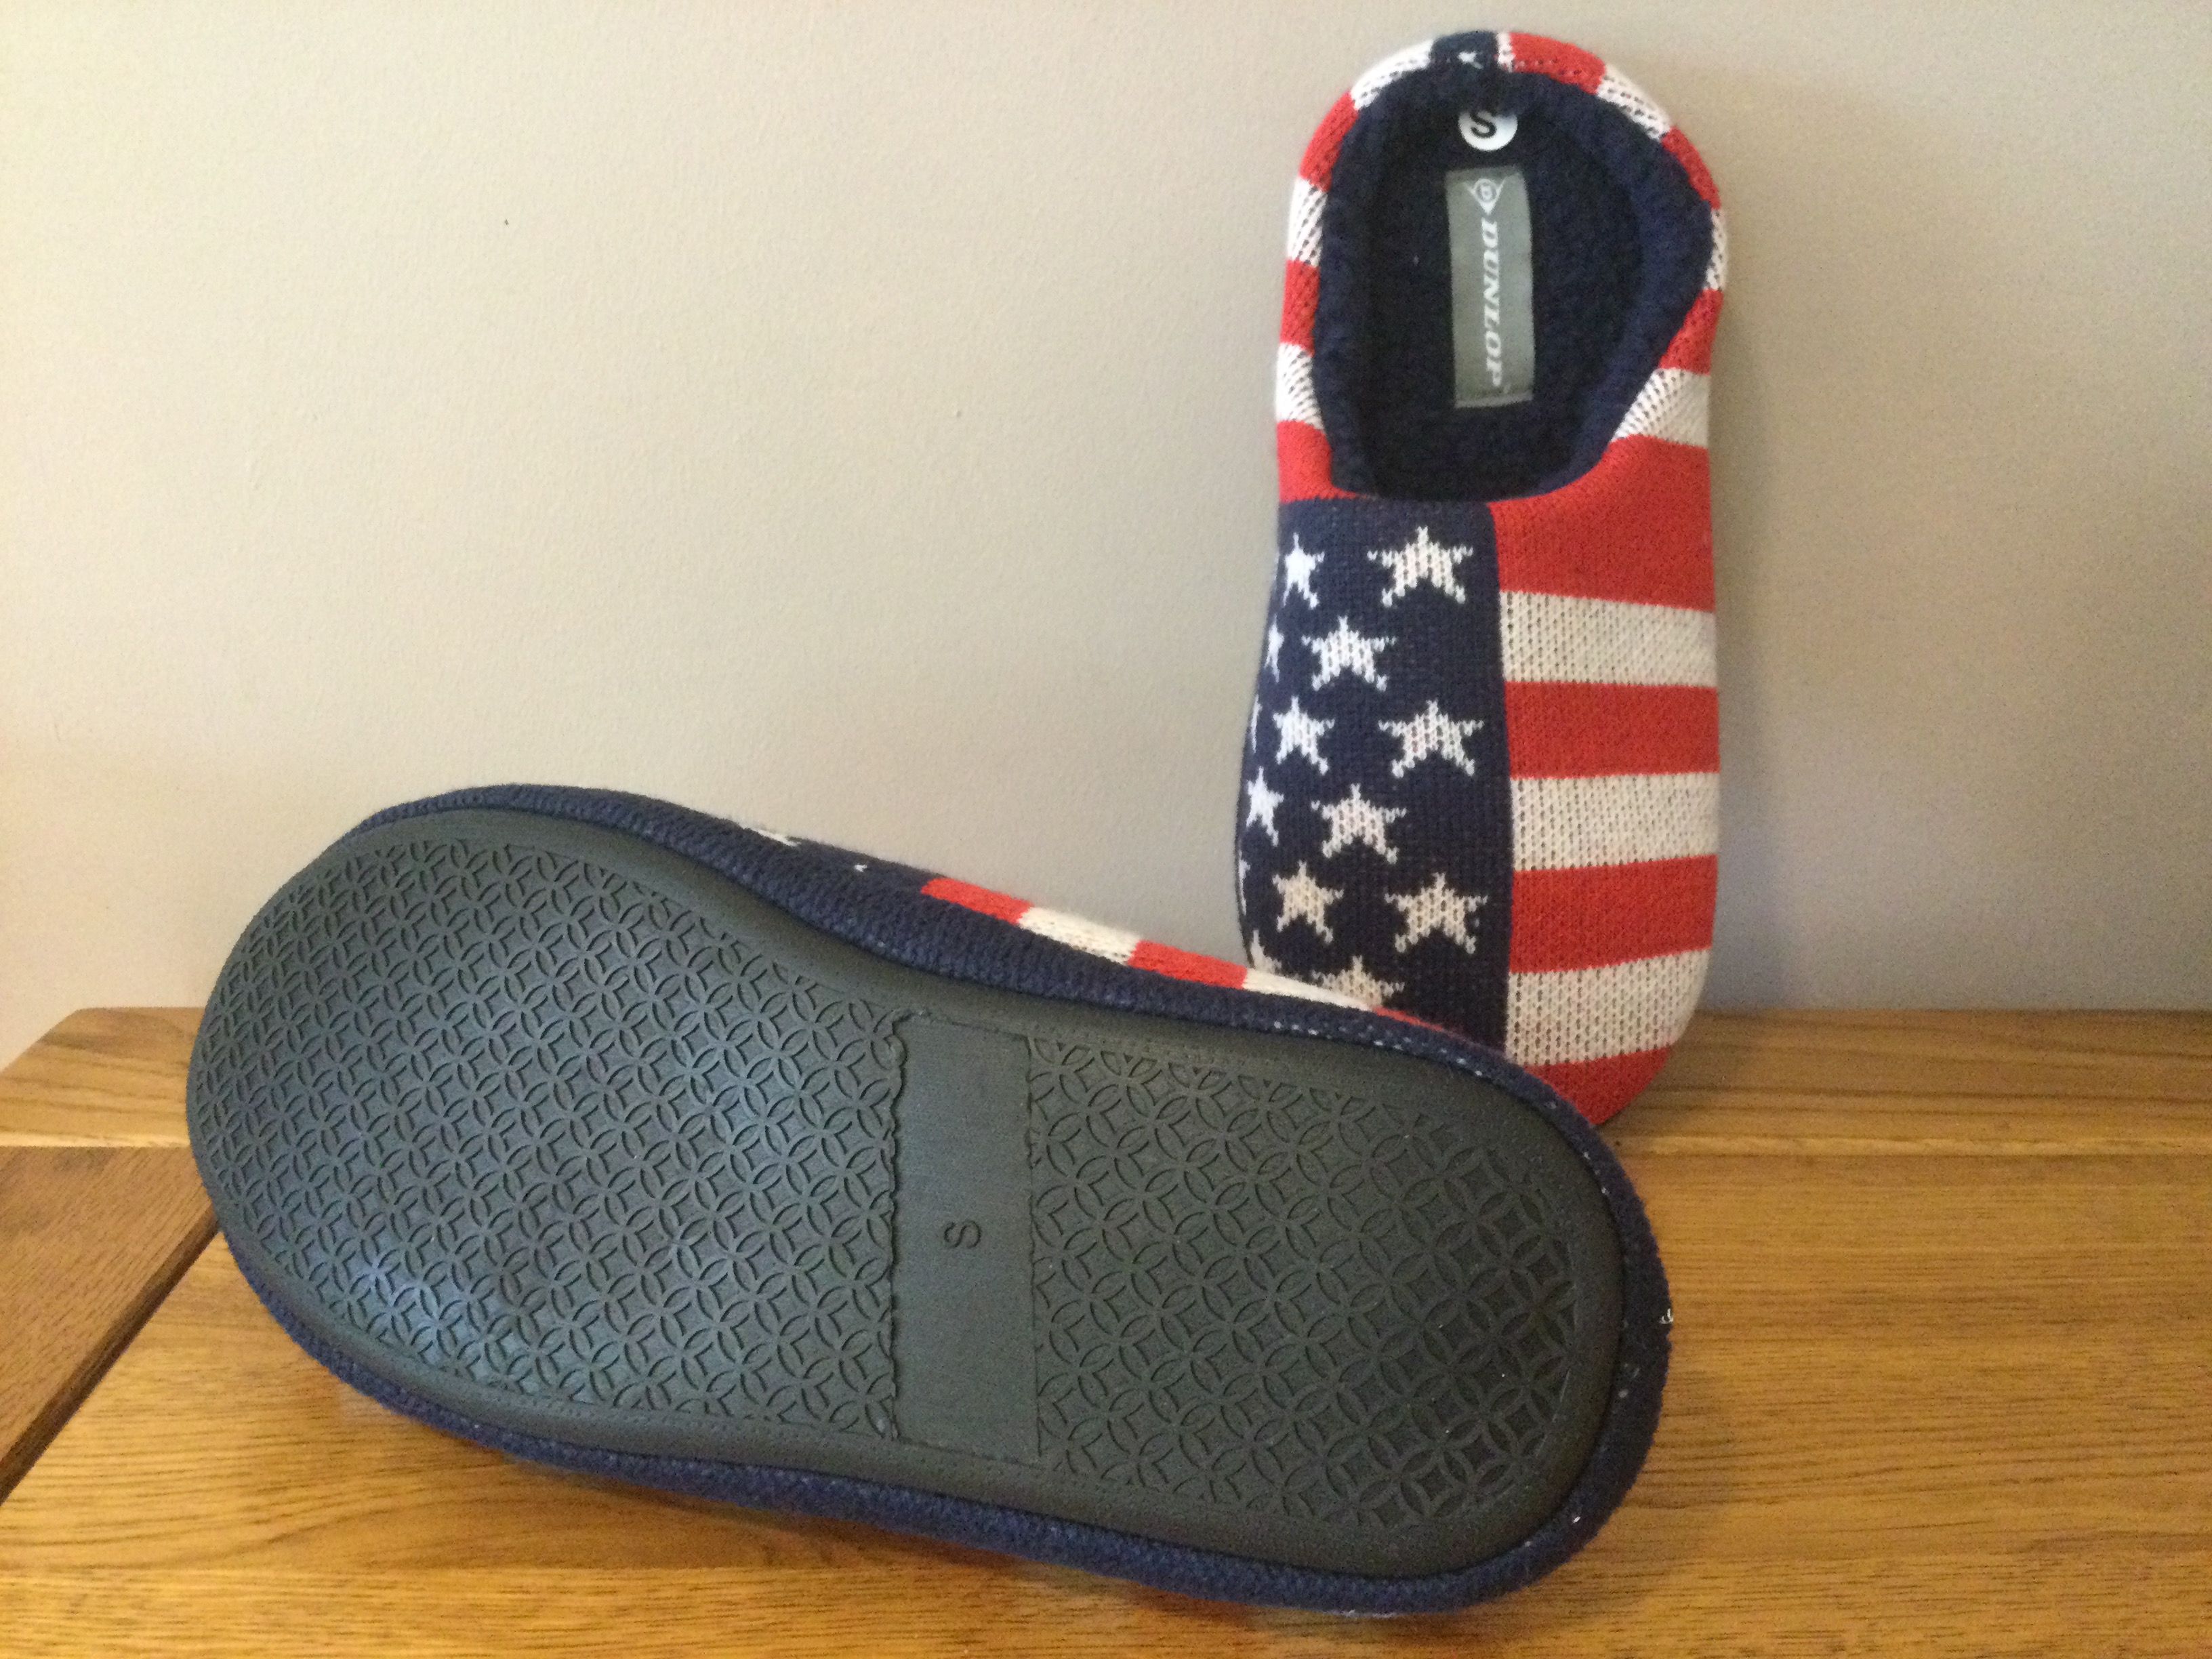 Men's Dunlop, “USA Stars and Stripes” Memory Foam, Mule Slippers, Size S (6/7) - New - Image 2 of 4